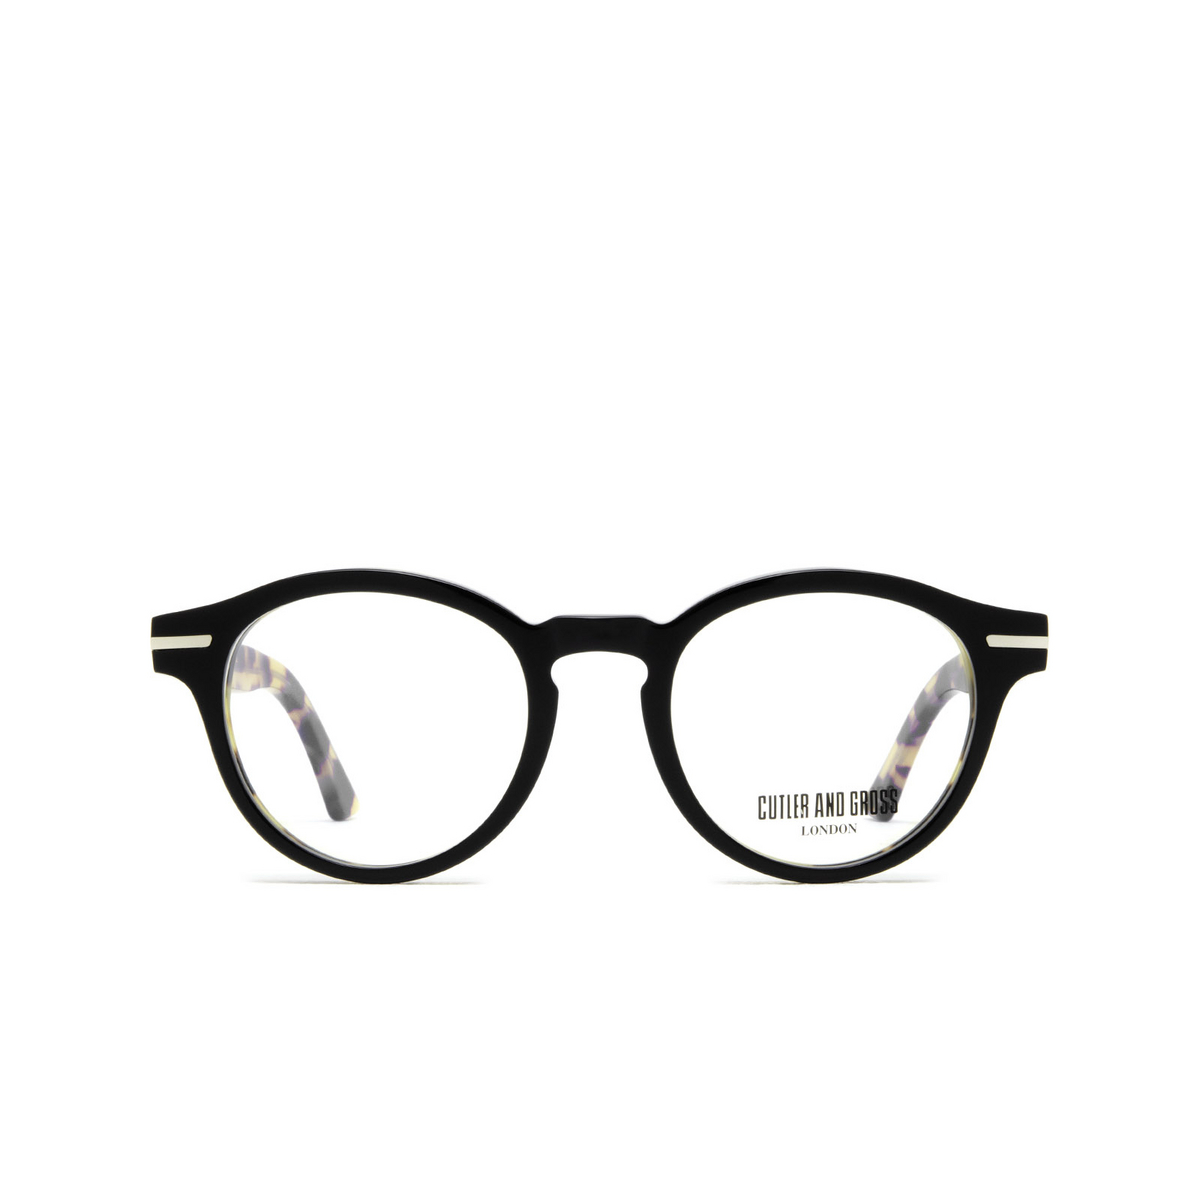 Cutler and Gross 1338 Eyeglasses 06 Black on Camo - front view